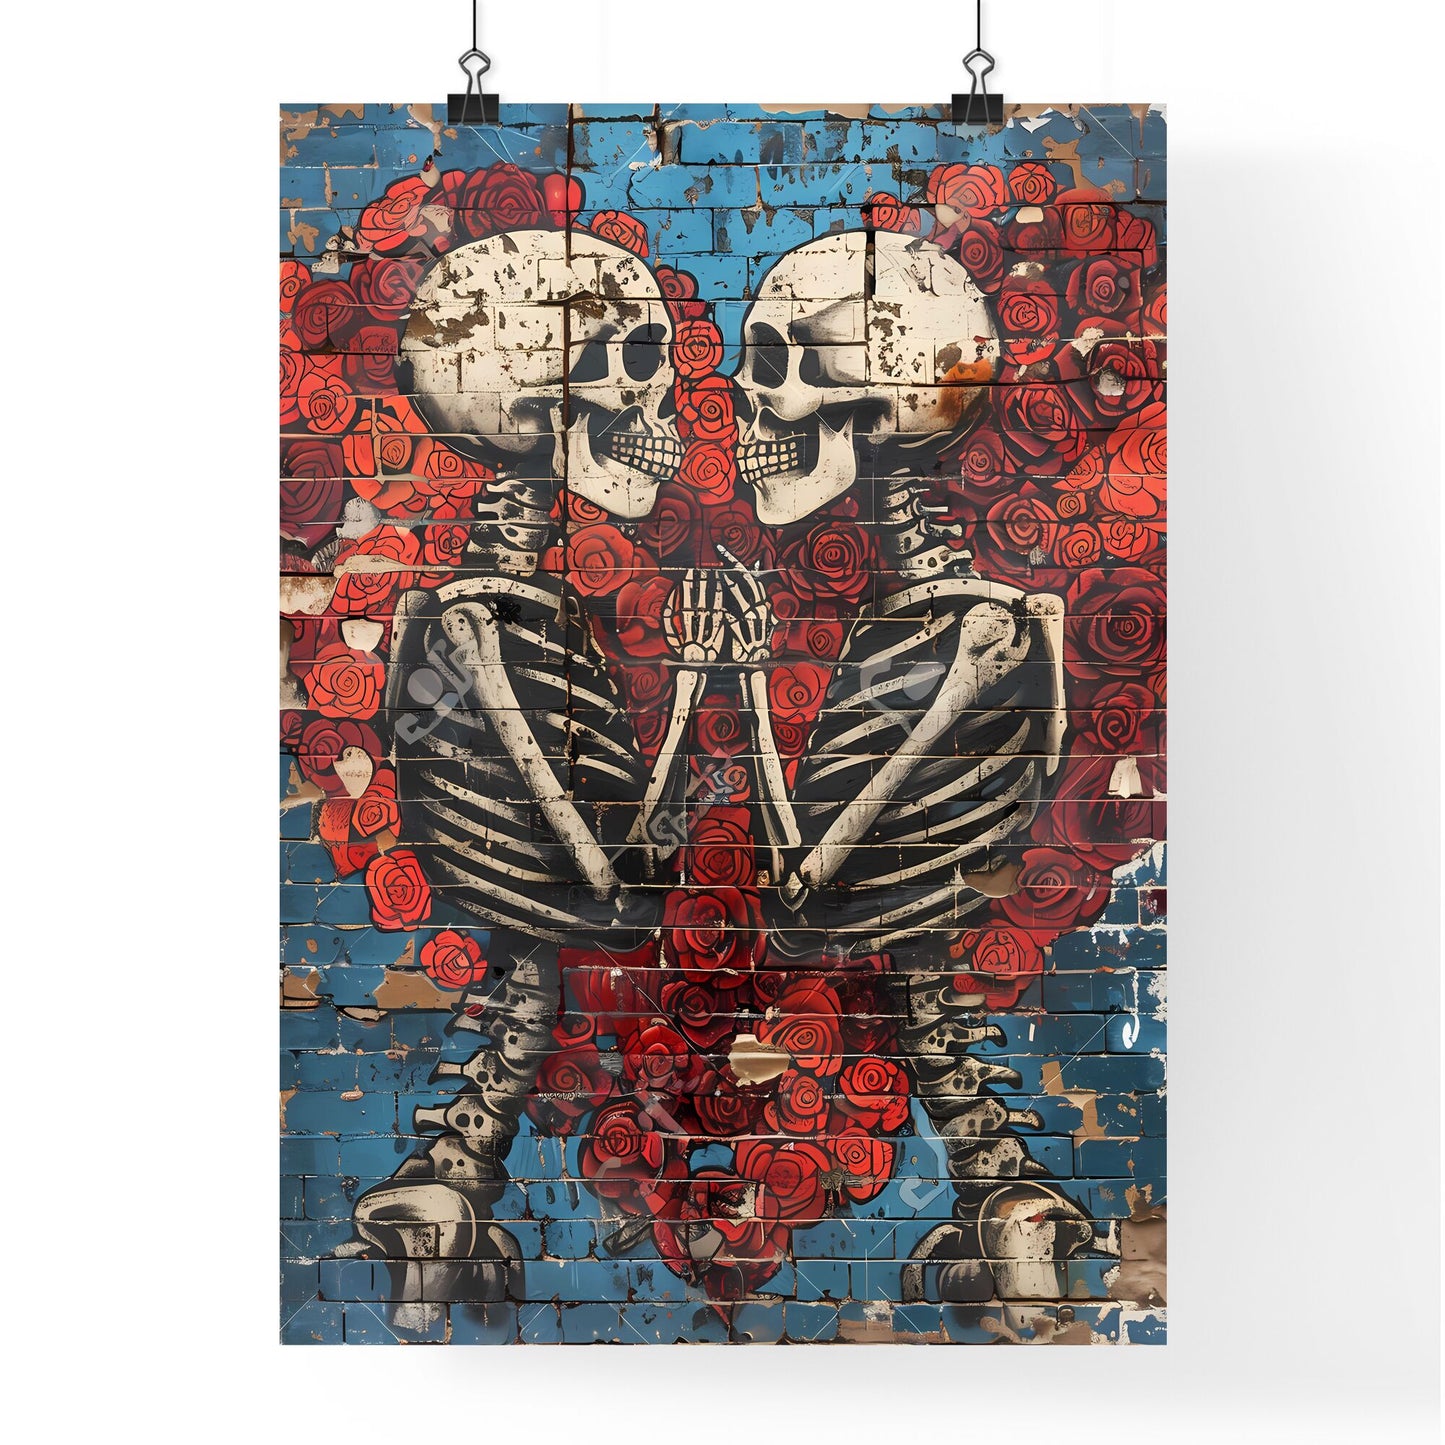 Vibrant Pop Art Mural: Skeletons and Roses in Intricate Botanical Embrace Default Title